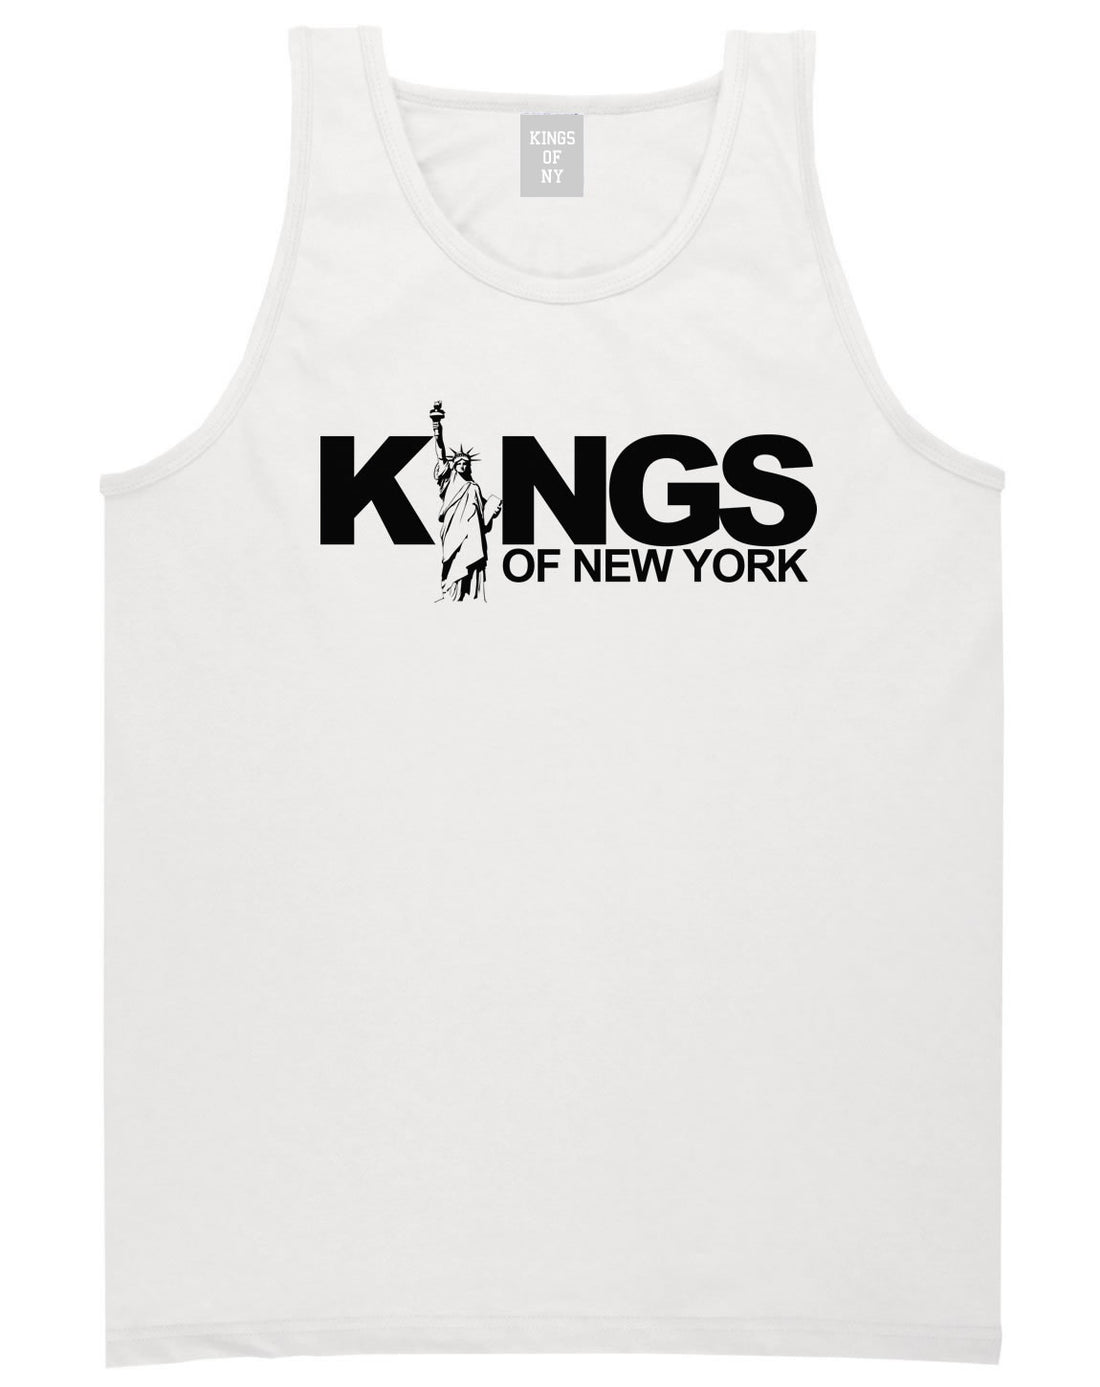 KINGS Lady Liberty Logo Tank Top in White by Kings Of NY